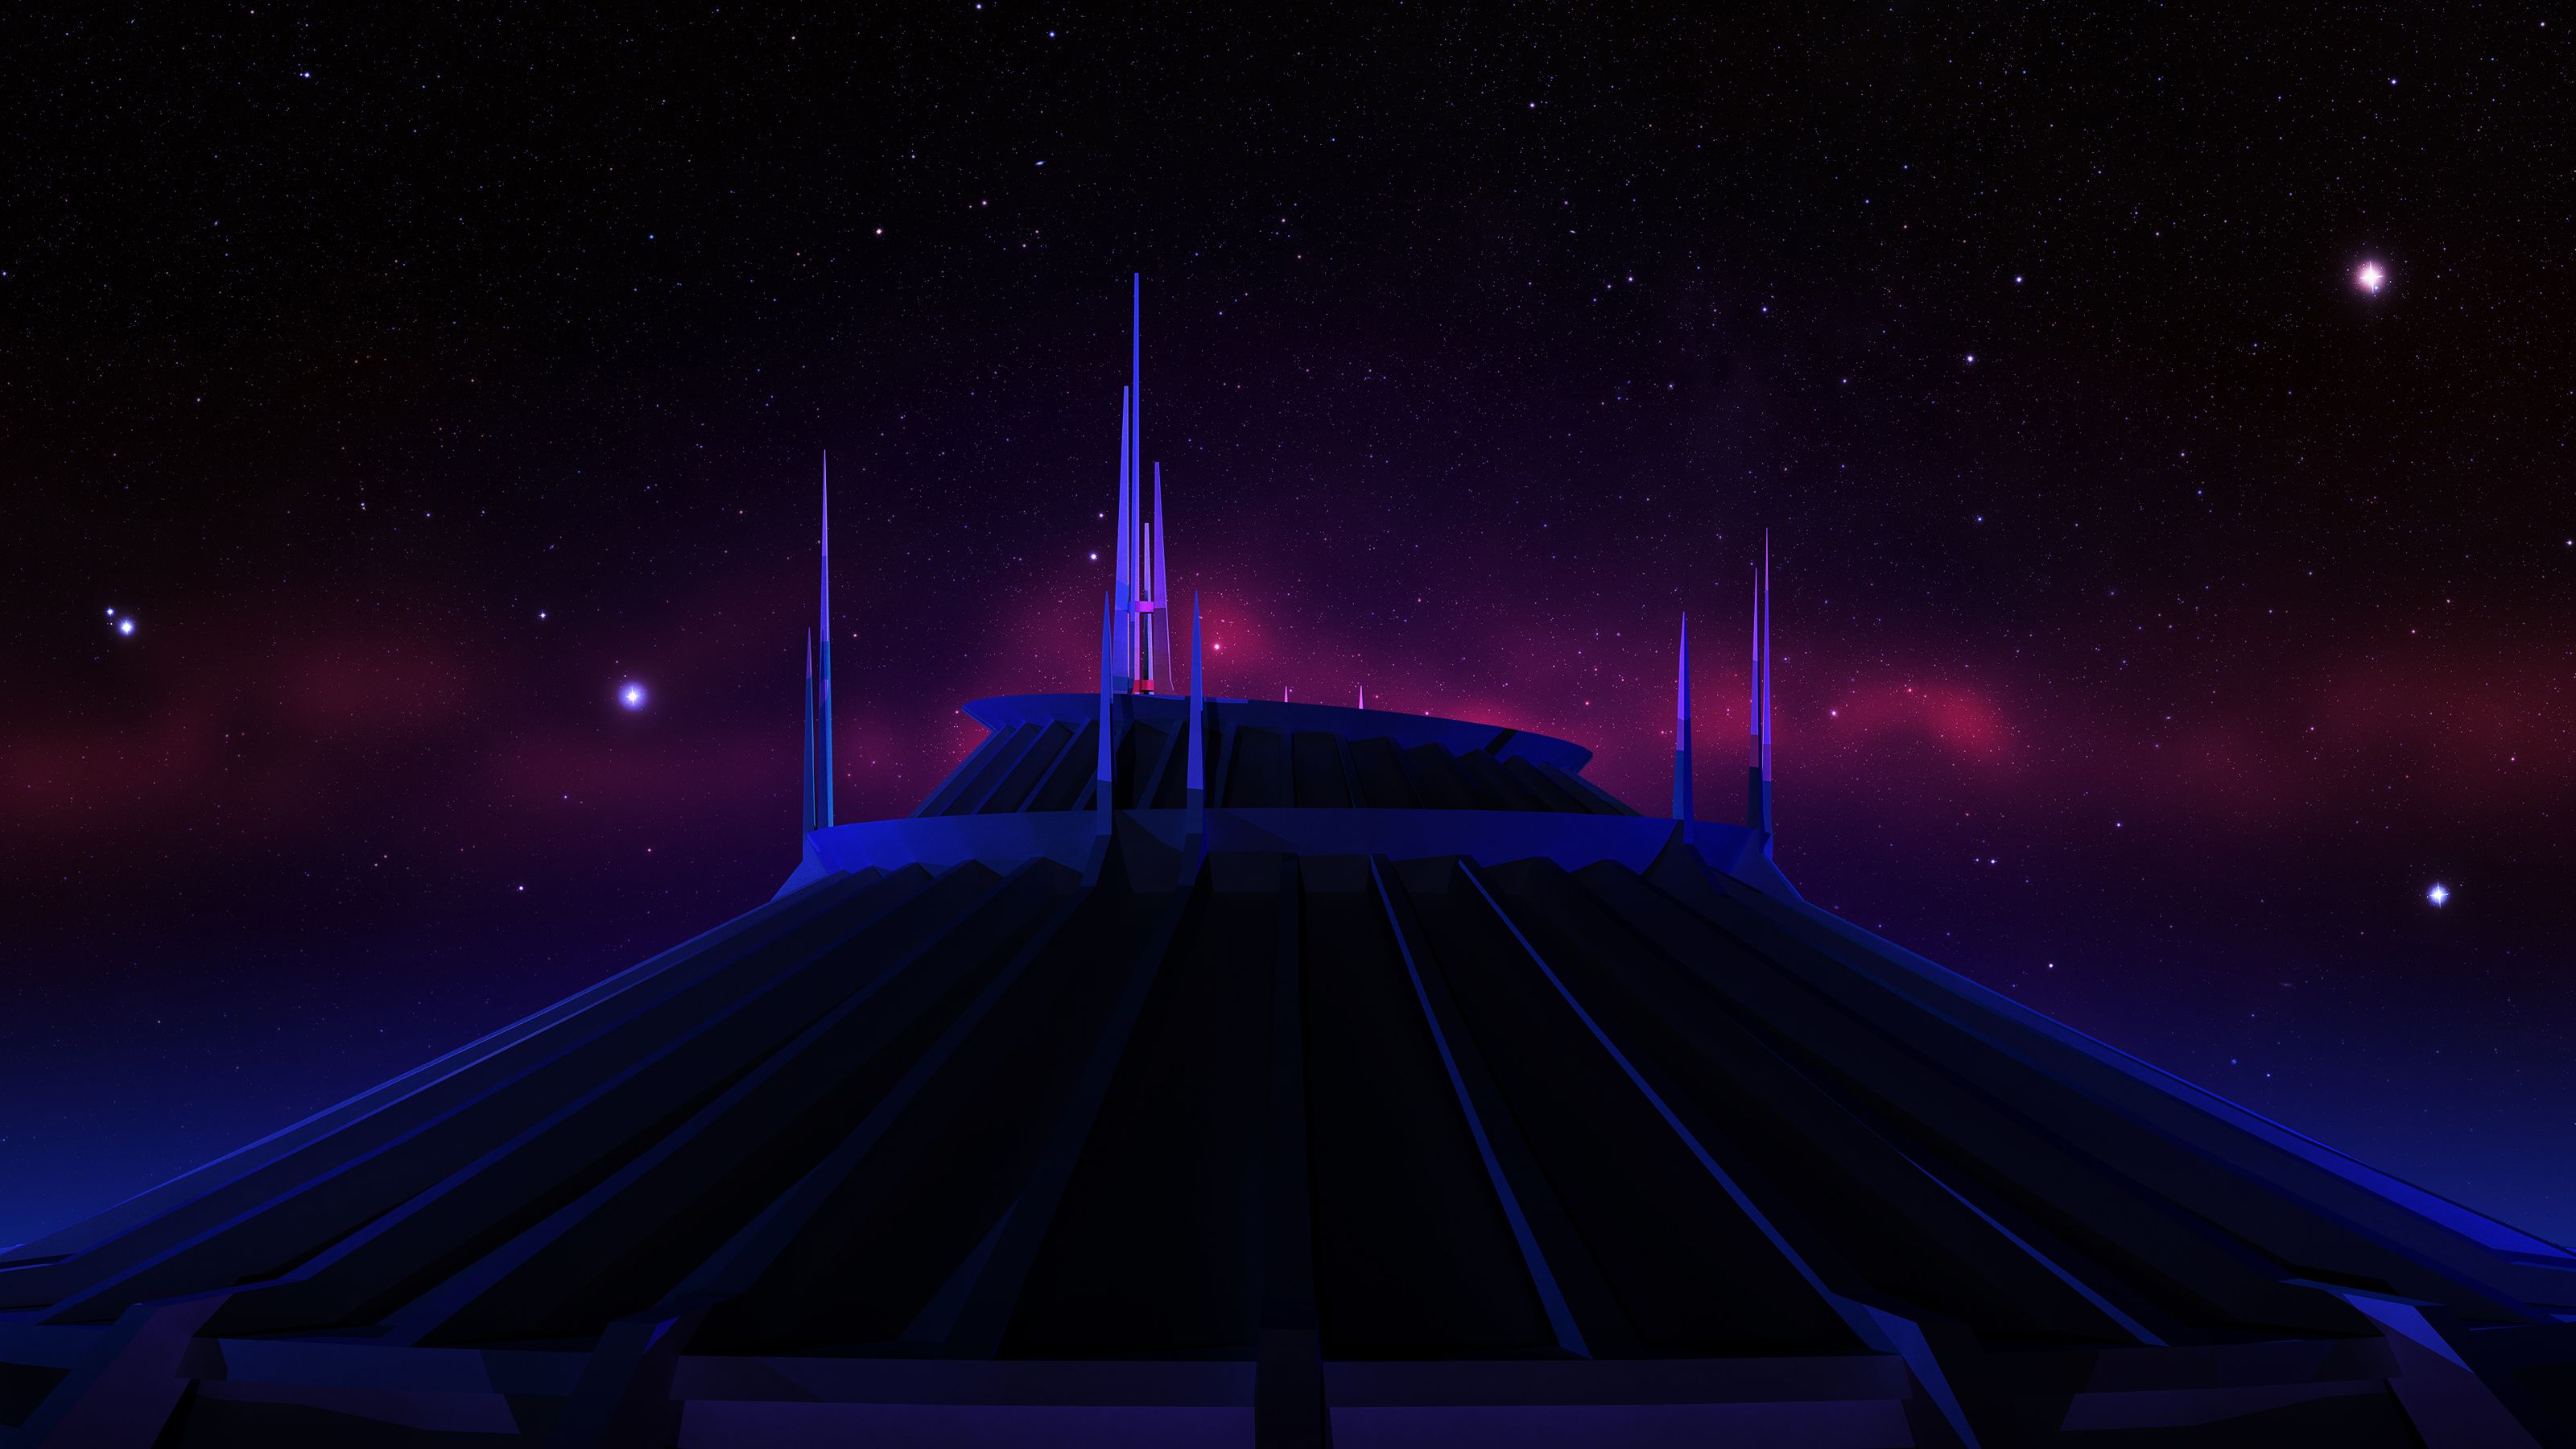 free download space mountain